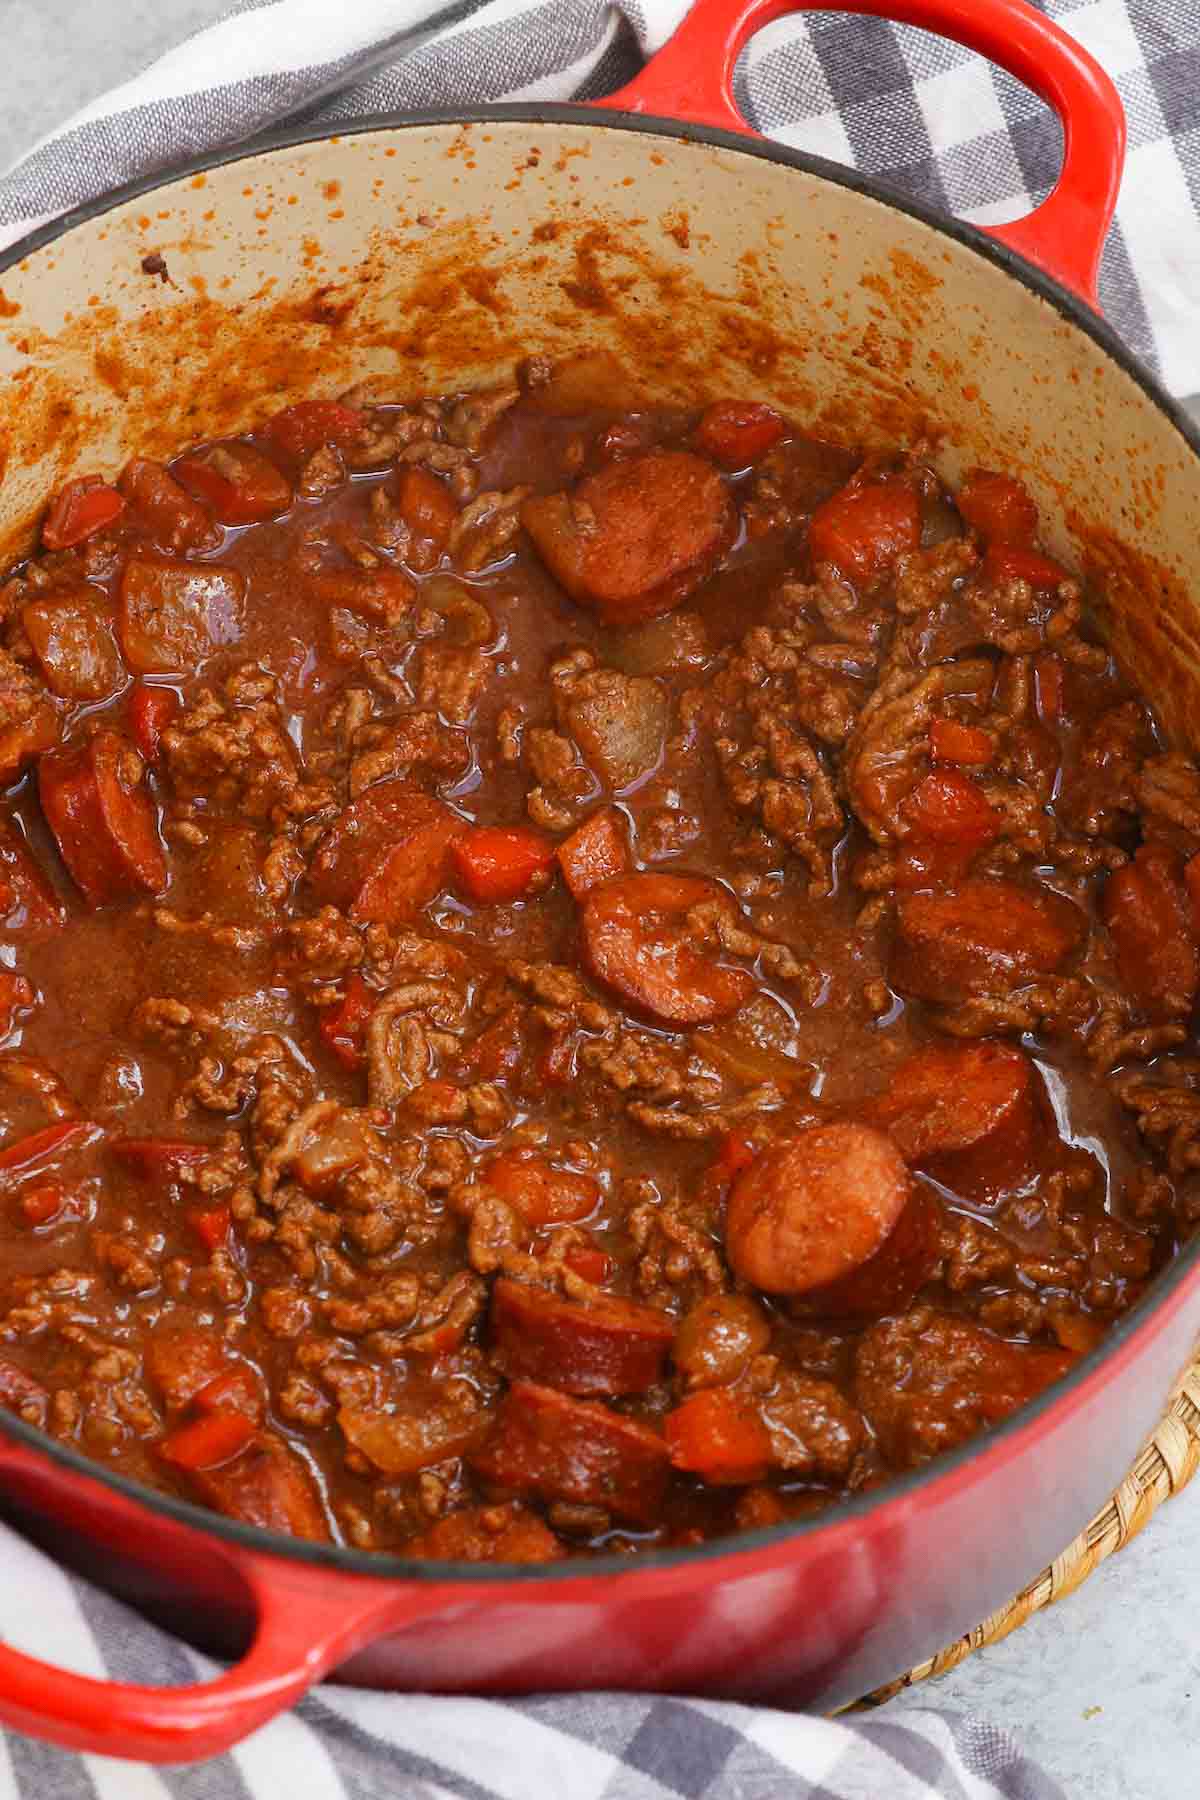 Texas Roadhouse is an American chain restaurant famous for its Southwestern cuisine. Popular menu items include steak, ribs and their infamous Texas Roadhouse Chili. Known for its spicy, smoky flavor, this copycat chili recipe is a two-meat treat for those who want a warm bowl of hearty comfort.